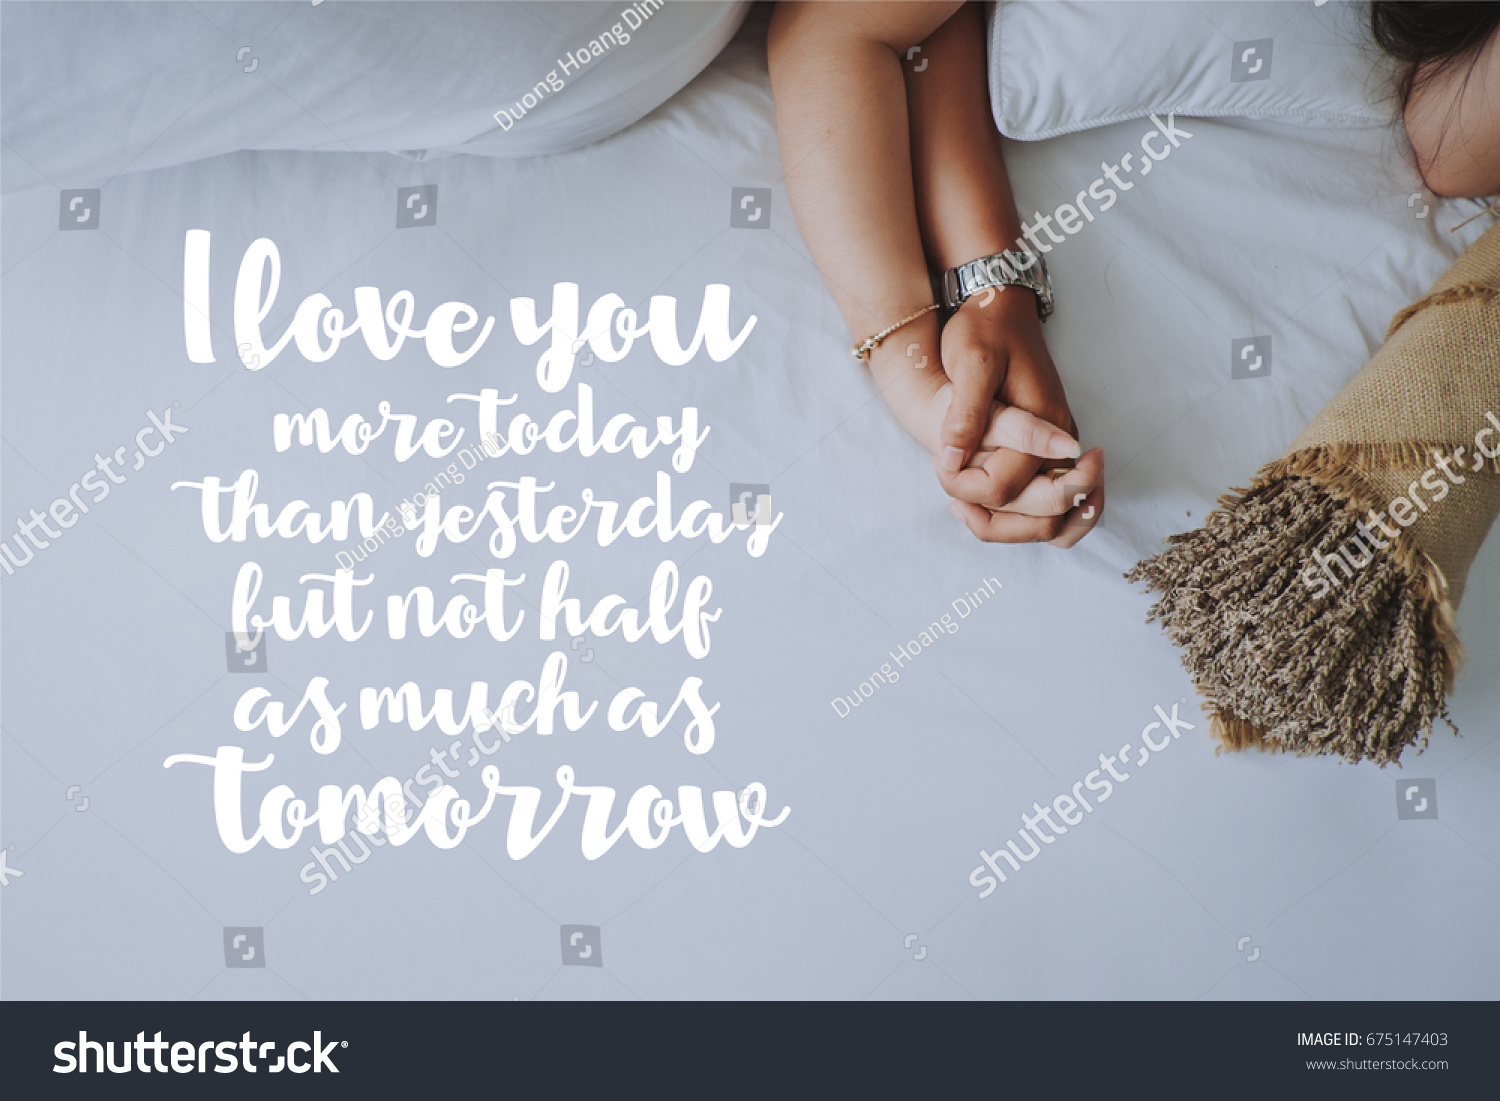 Inspirational Quotes About Love Hand Hand Stock Photo Edit Now